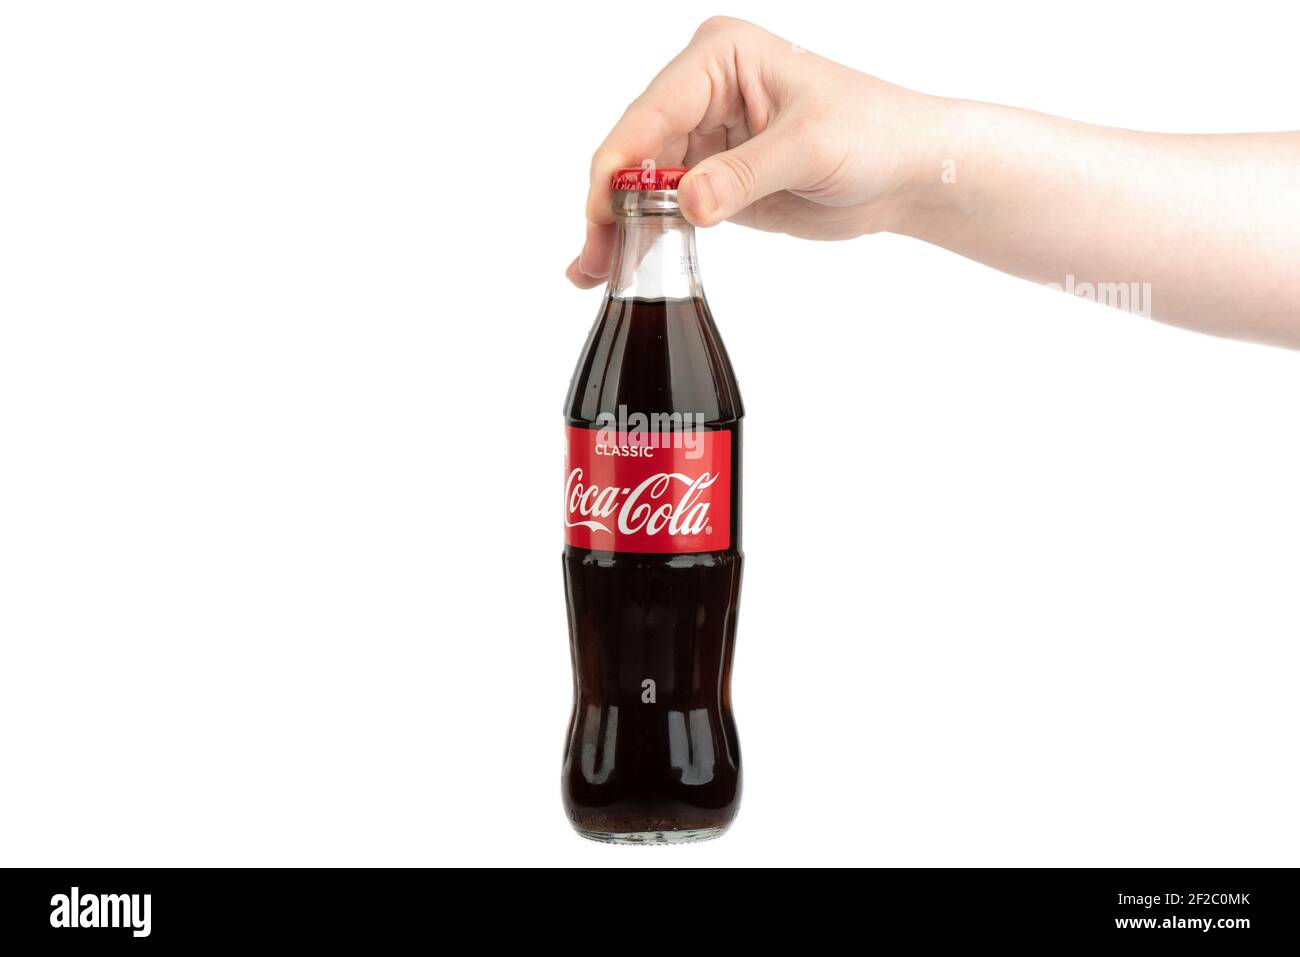 Moscow, Russia - March 1, 2021: A woman's hand holds a glass bottle of Coca-Cola Classic by the cork. Copy space. Stock Photo